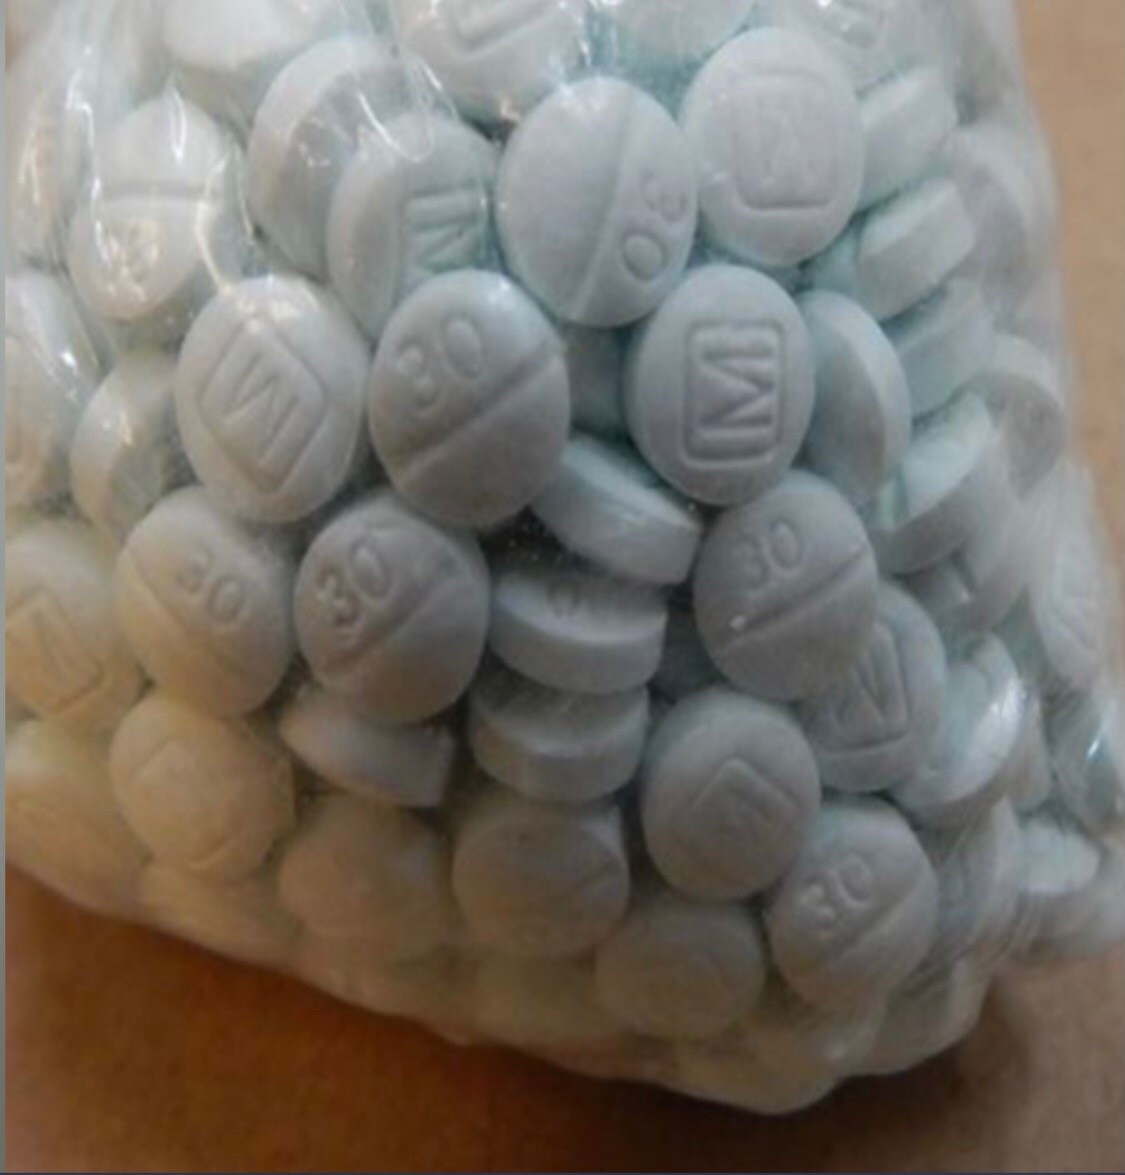 Fentanyl laced pills found in a car at a traffic stop in Arizona. (Photo: Kansas City Police Department)